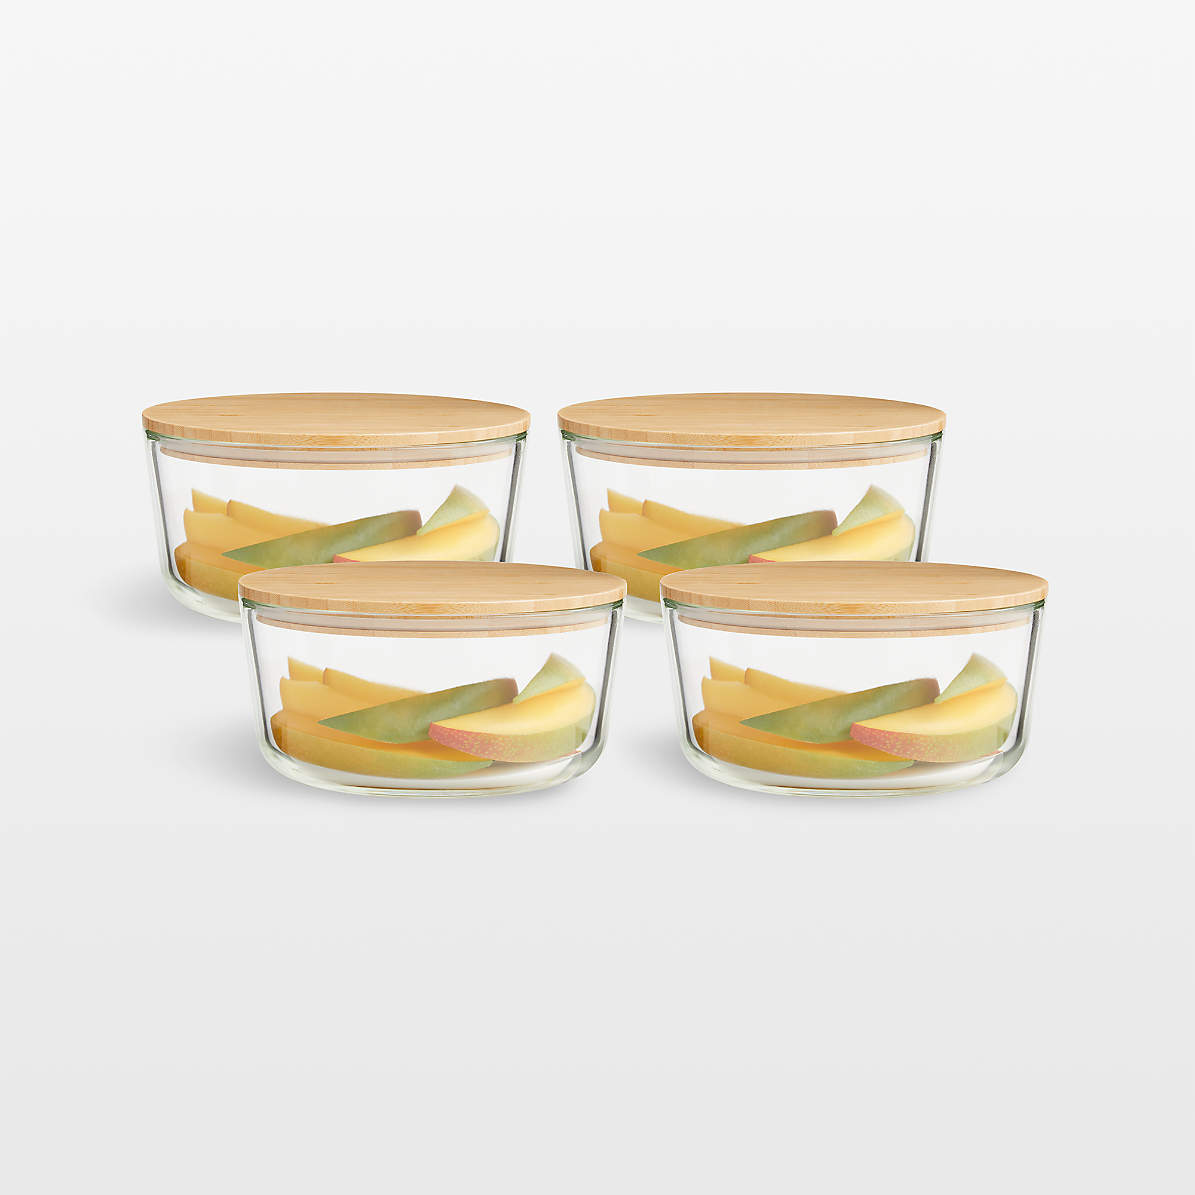 Source Clear Glass Food Storage Containers with Airtight Bamboo